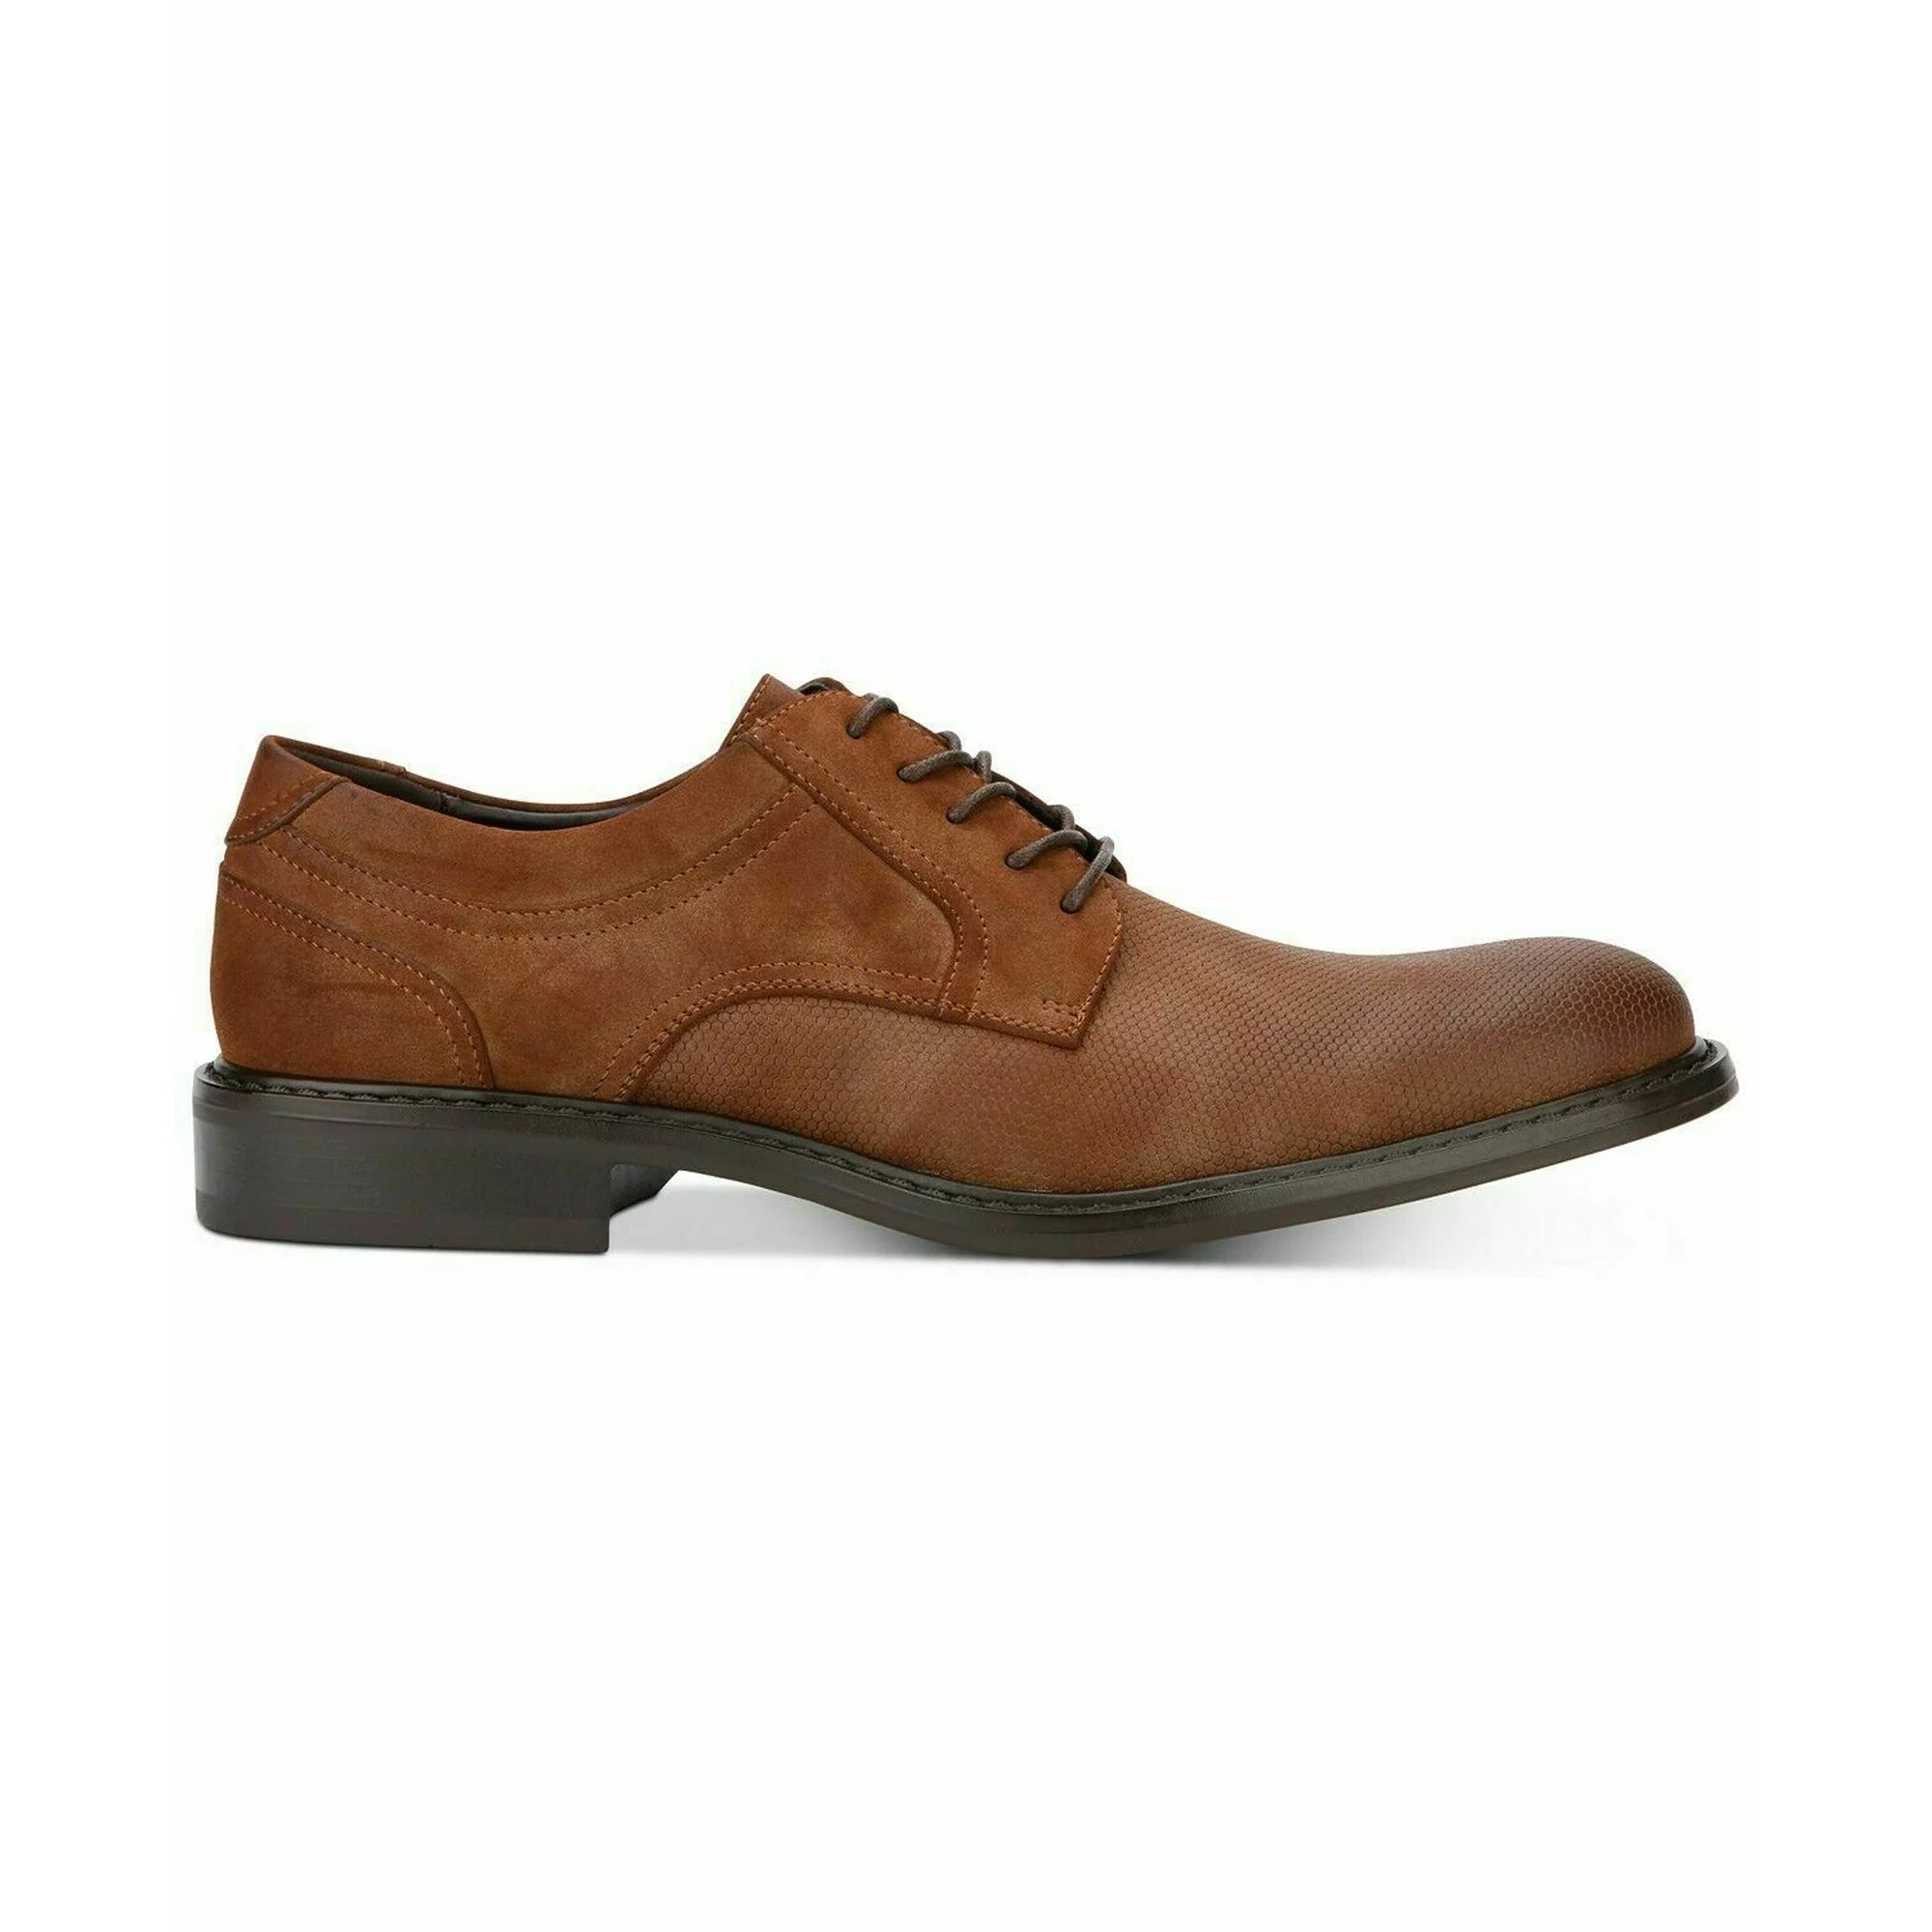 Unlisted Kenneth Cole Men's Buzzer Oxfords